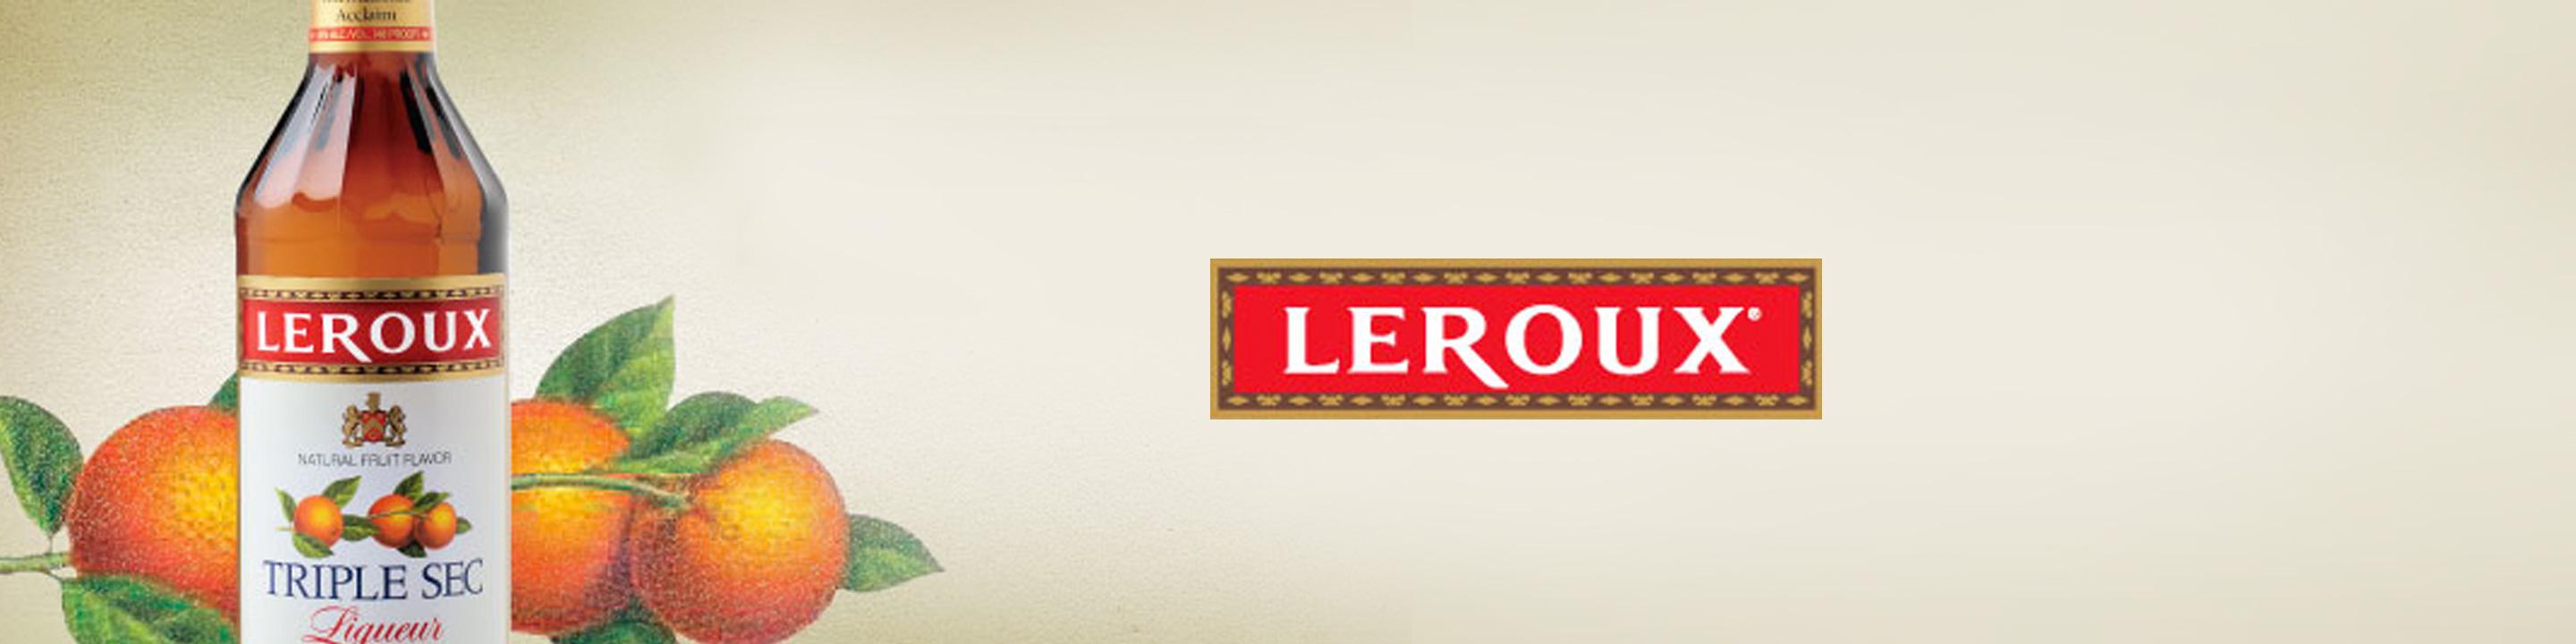 The Leroux family of distillers dates back over 100 years. Its products originated in Belgium but are today produced in the U.S. They are made with the finest natural ingredients, and the entire line is certified Kosher, a unique point of differentiation.

Buy Leroux online now from nearby liquor stores via Minibar Delivery.